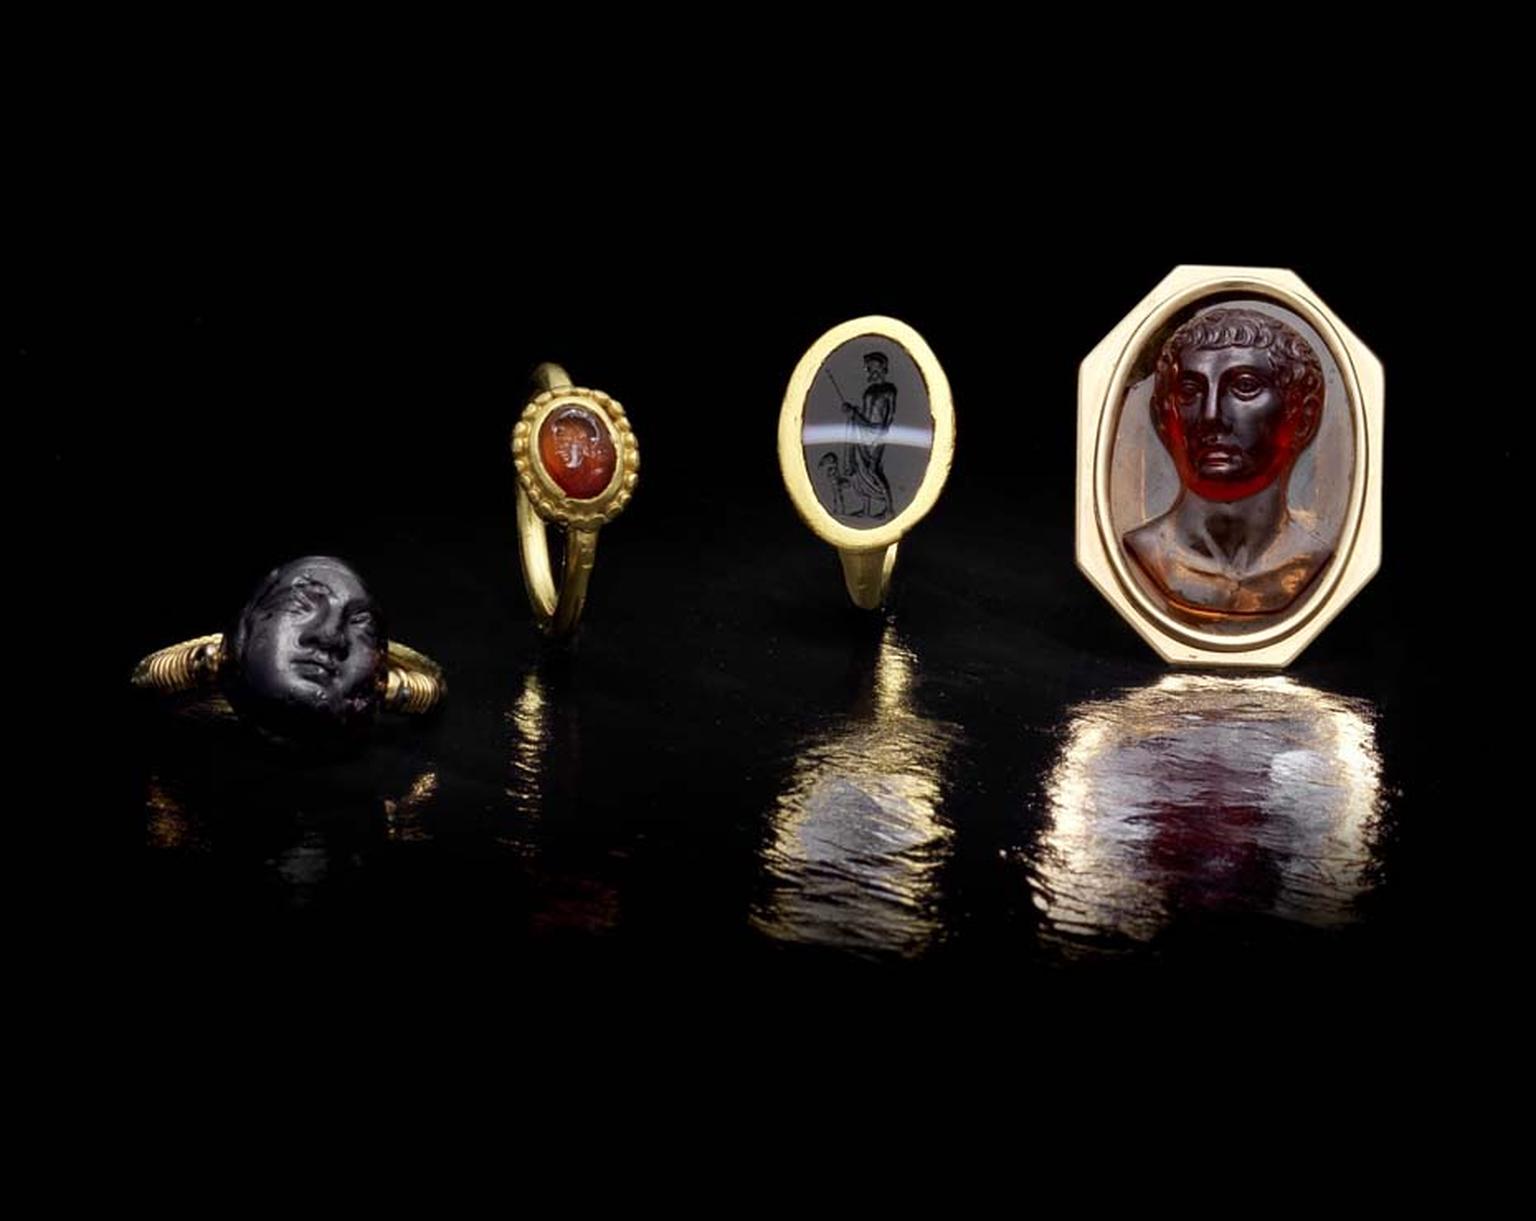 A selection of intaglio rings from the Ceres Collection. The most ancient ring of the collection dates from the 4th century BC and others range from the Renaissance period right through to the 19th century.